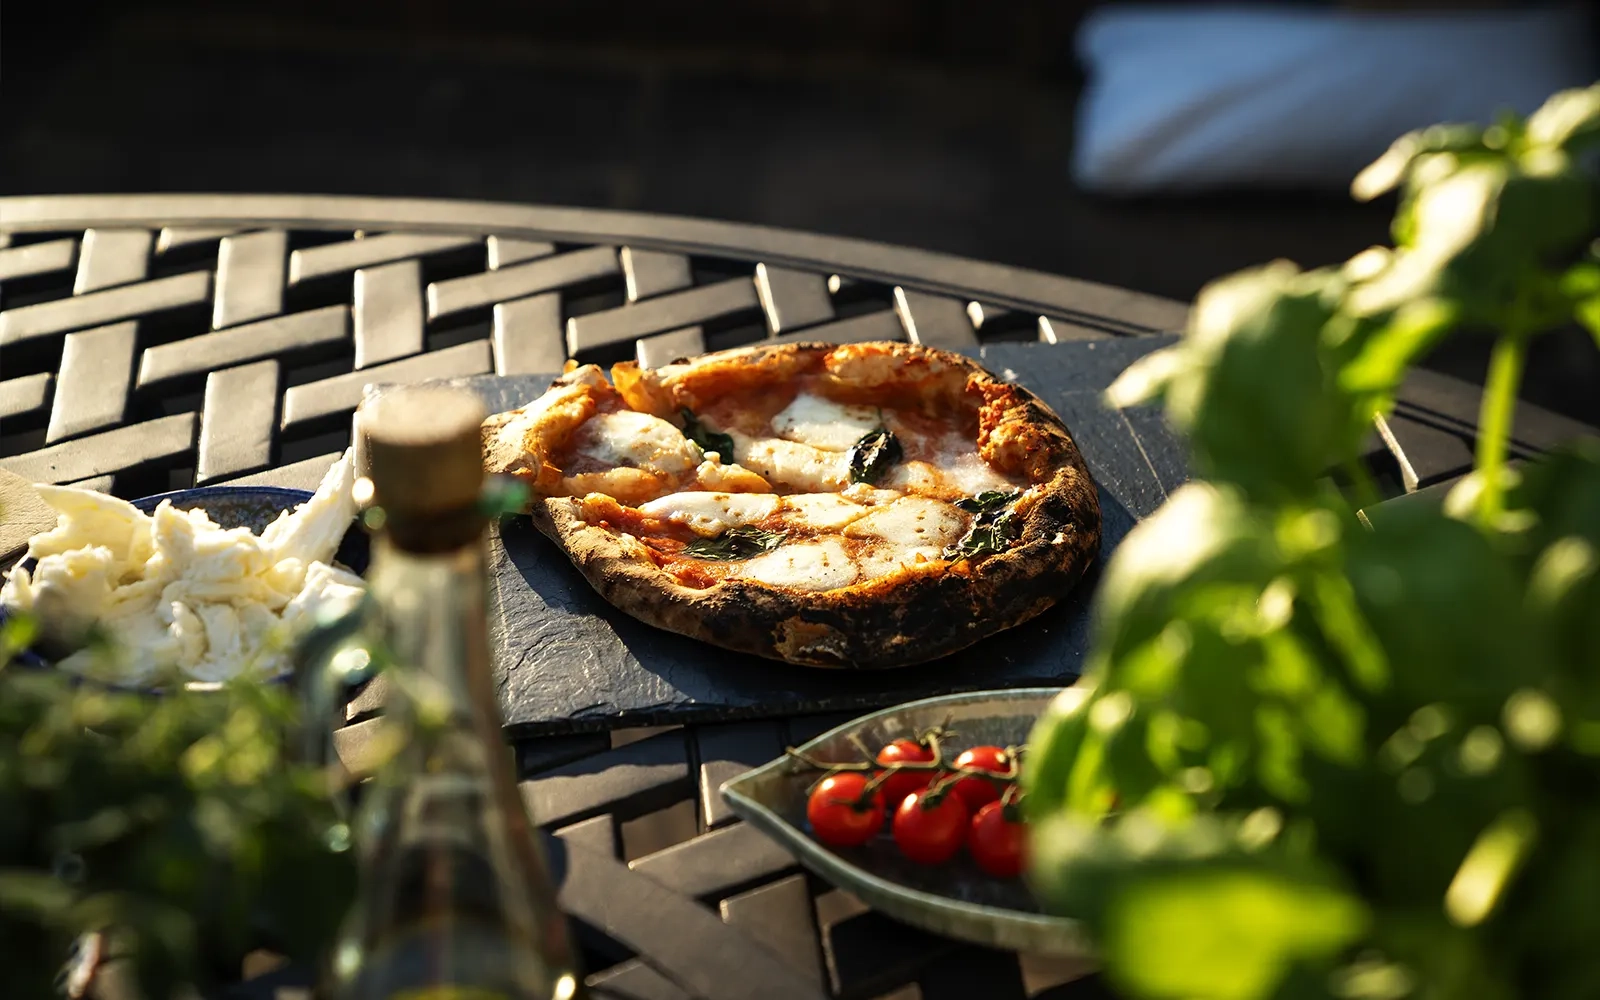 Close-up of a pizza on an outdoor table surrounded by a plant and sauces